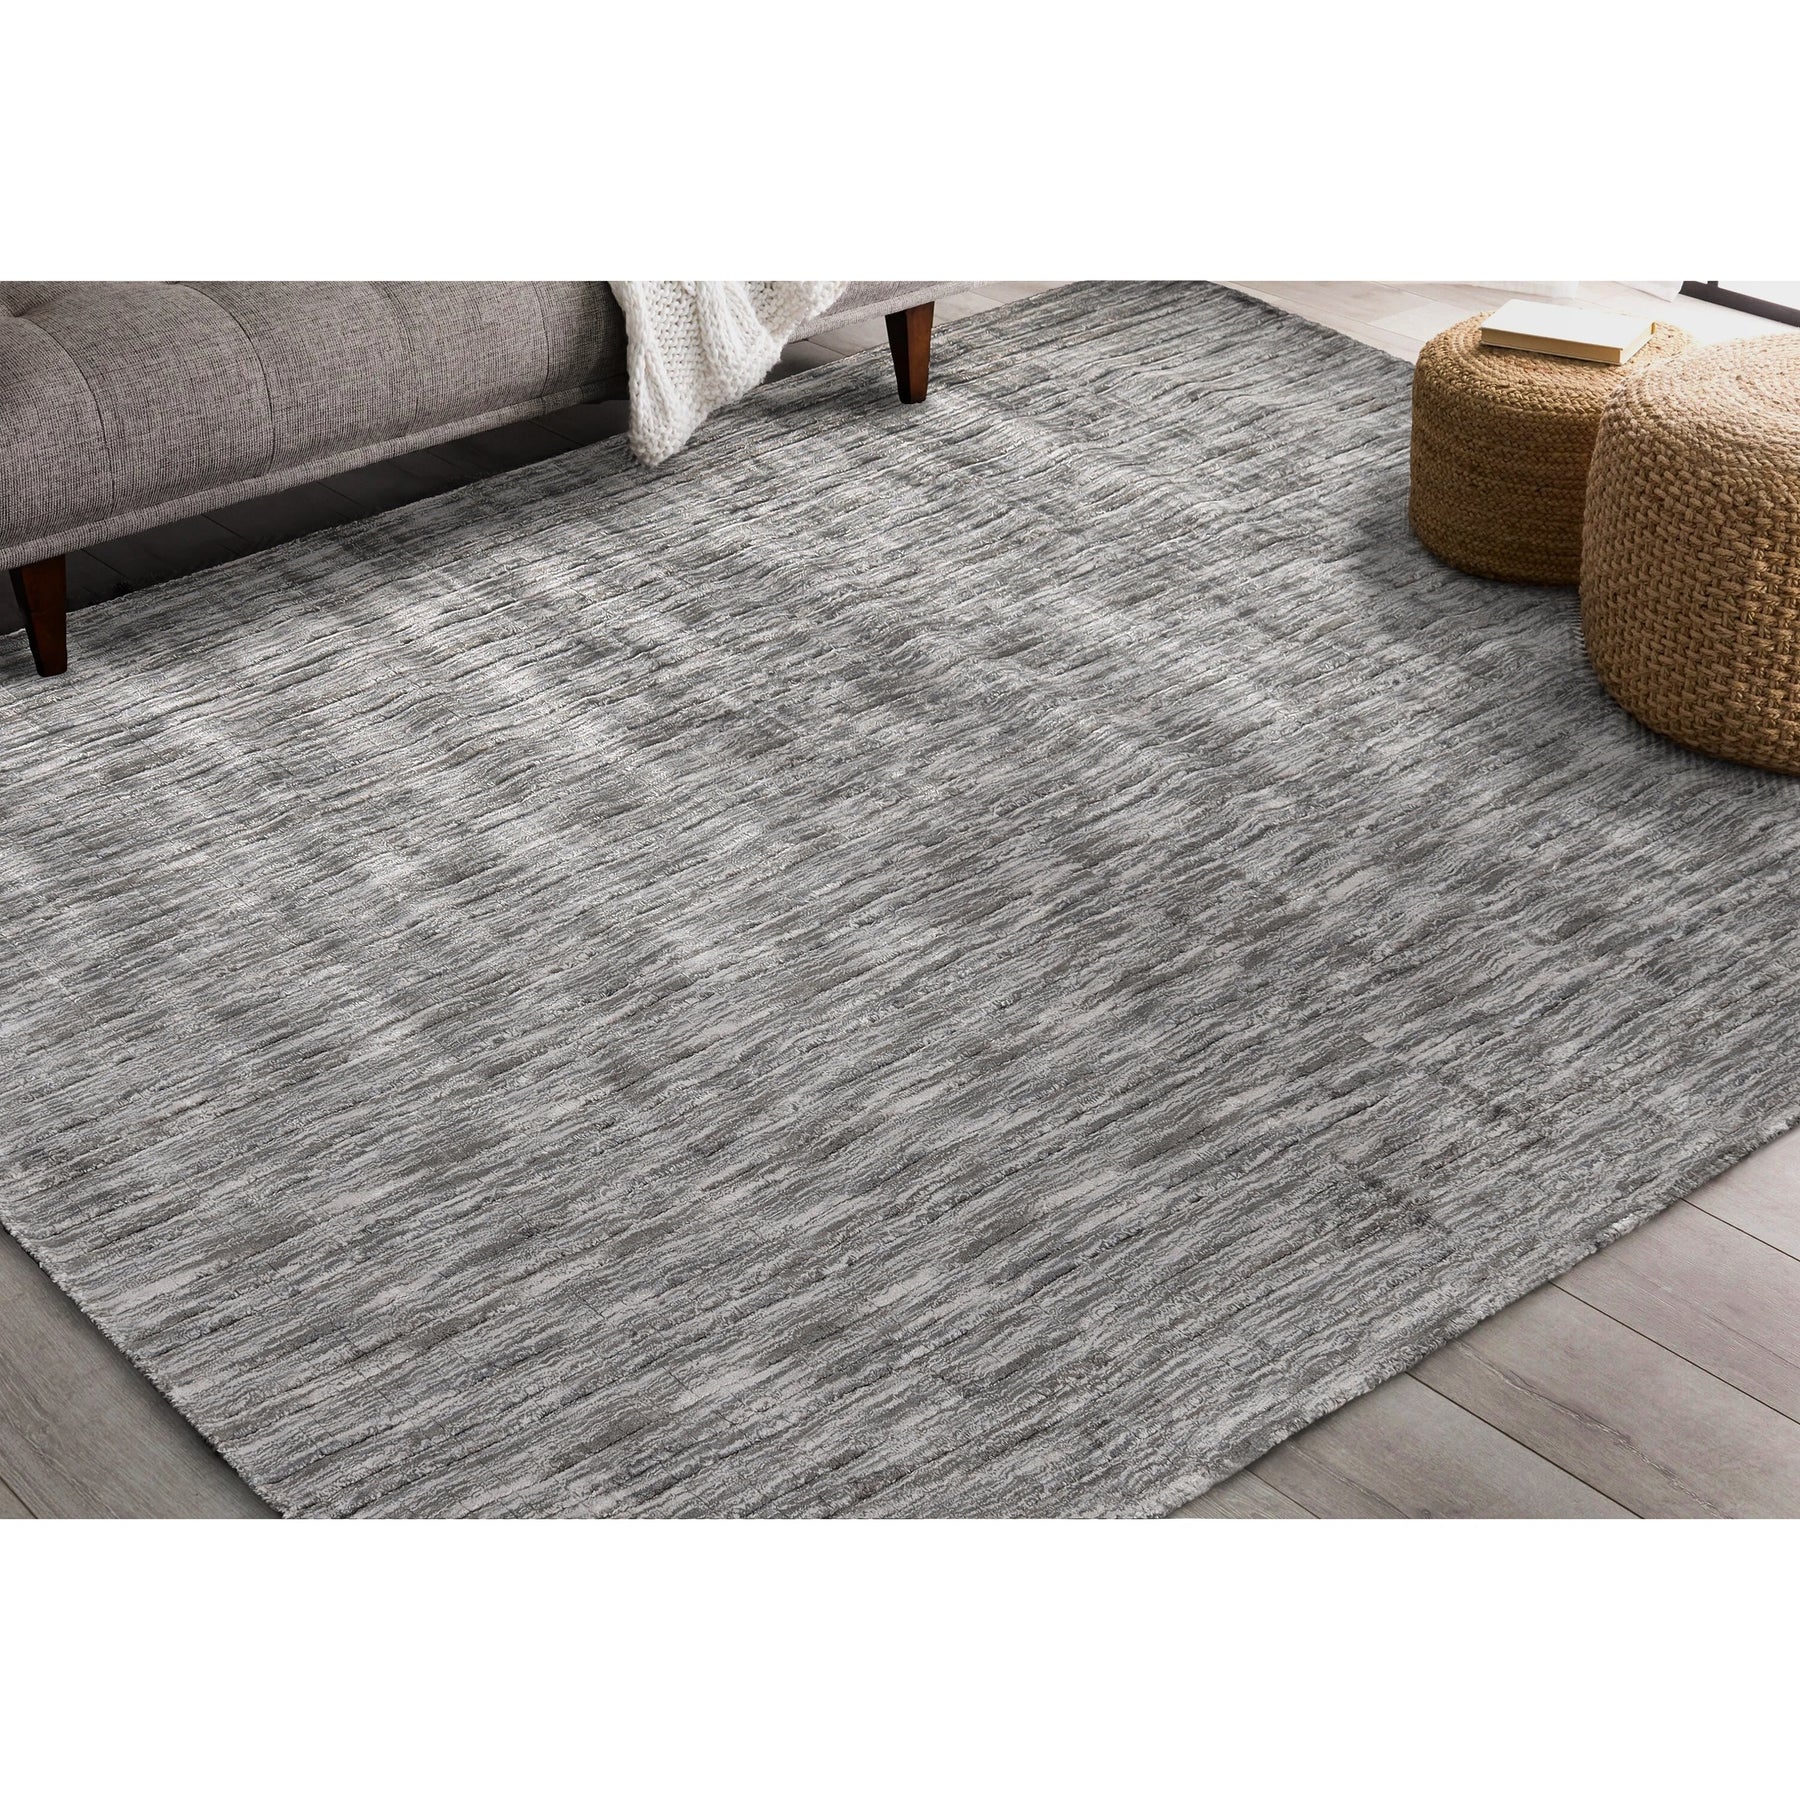 Superior Chalkboard Hand-Woven Viscose Modern Abstract Indoor Area Rug, 5 ft. x 8 ft - Grey